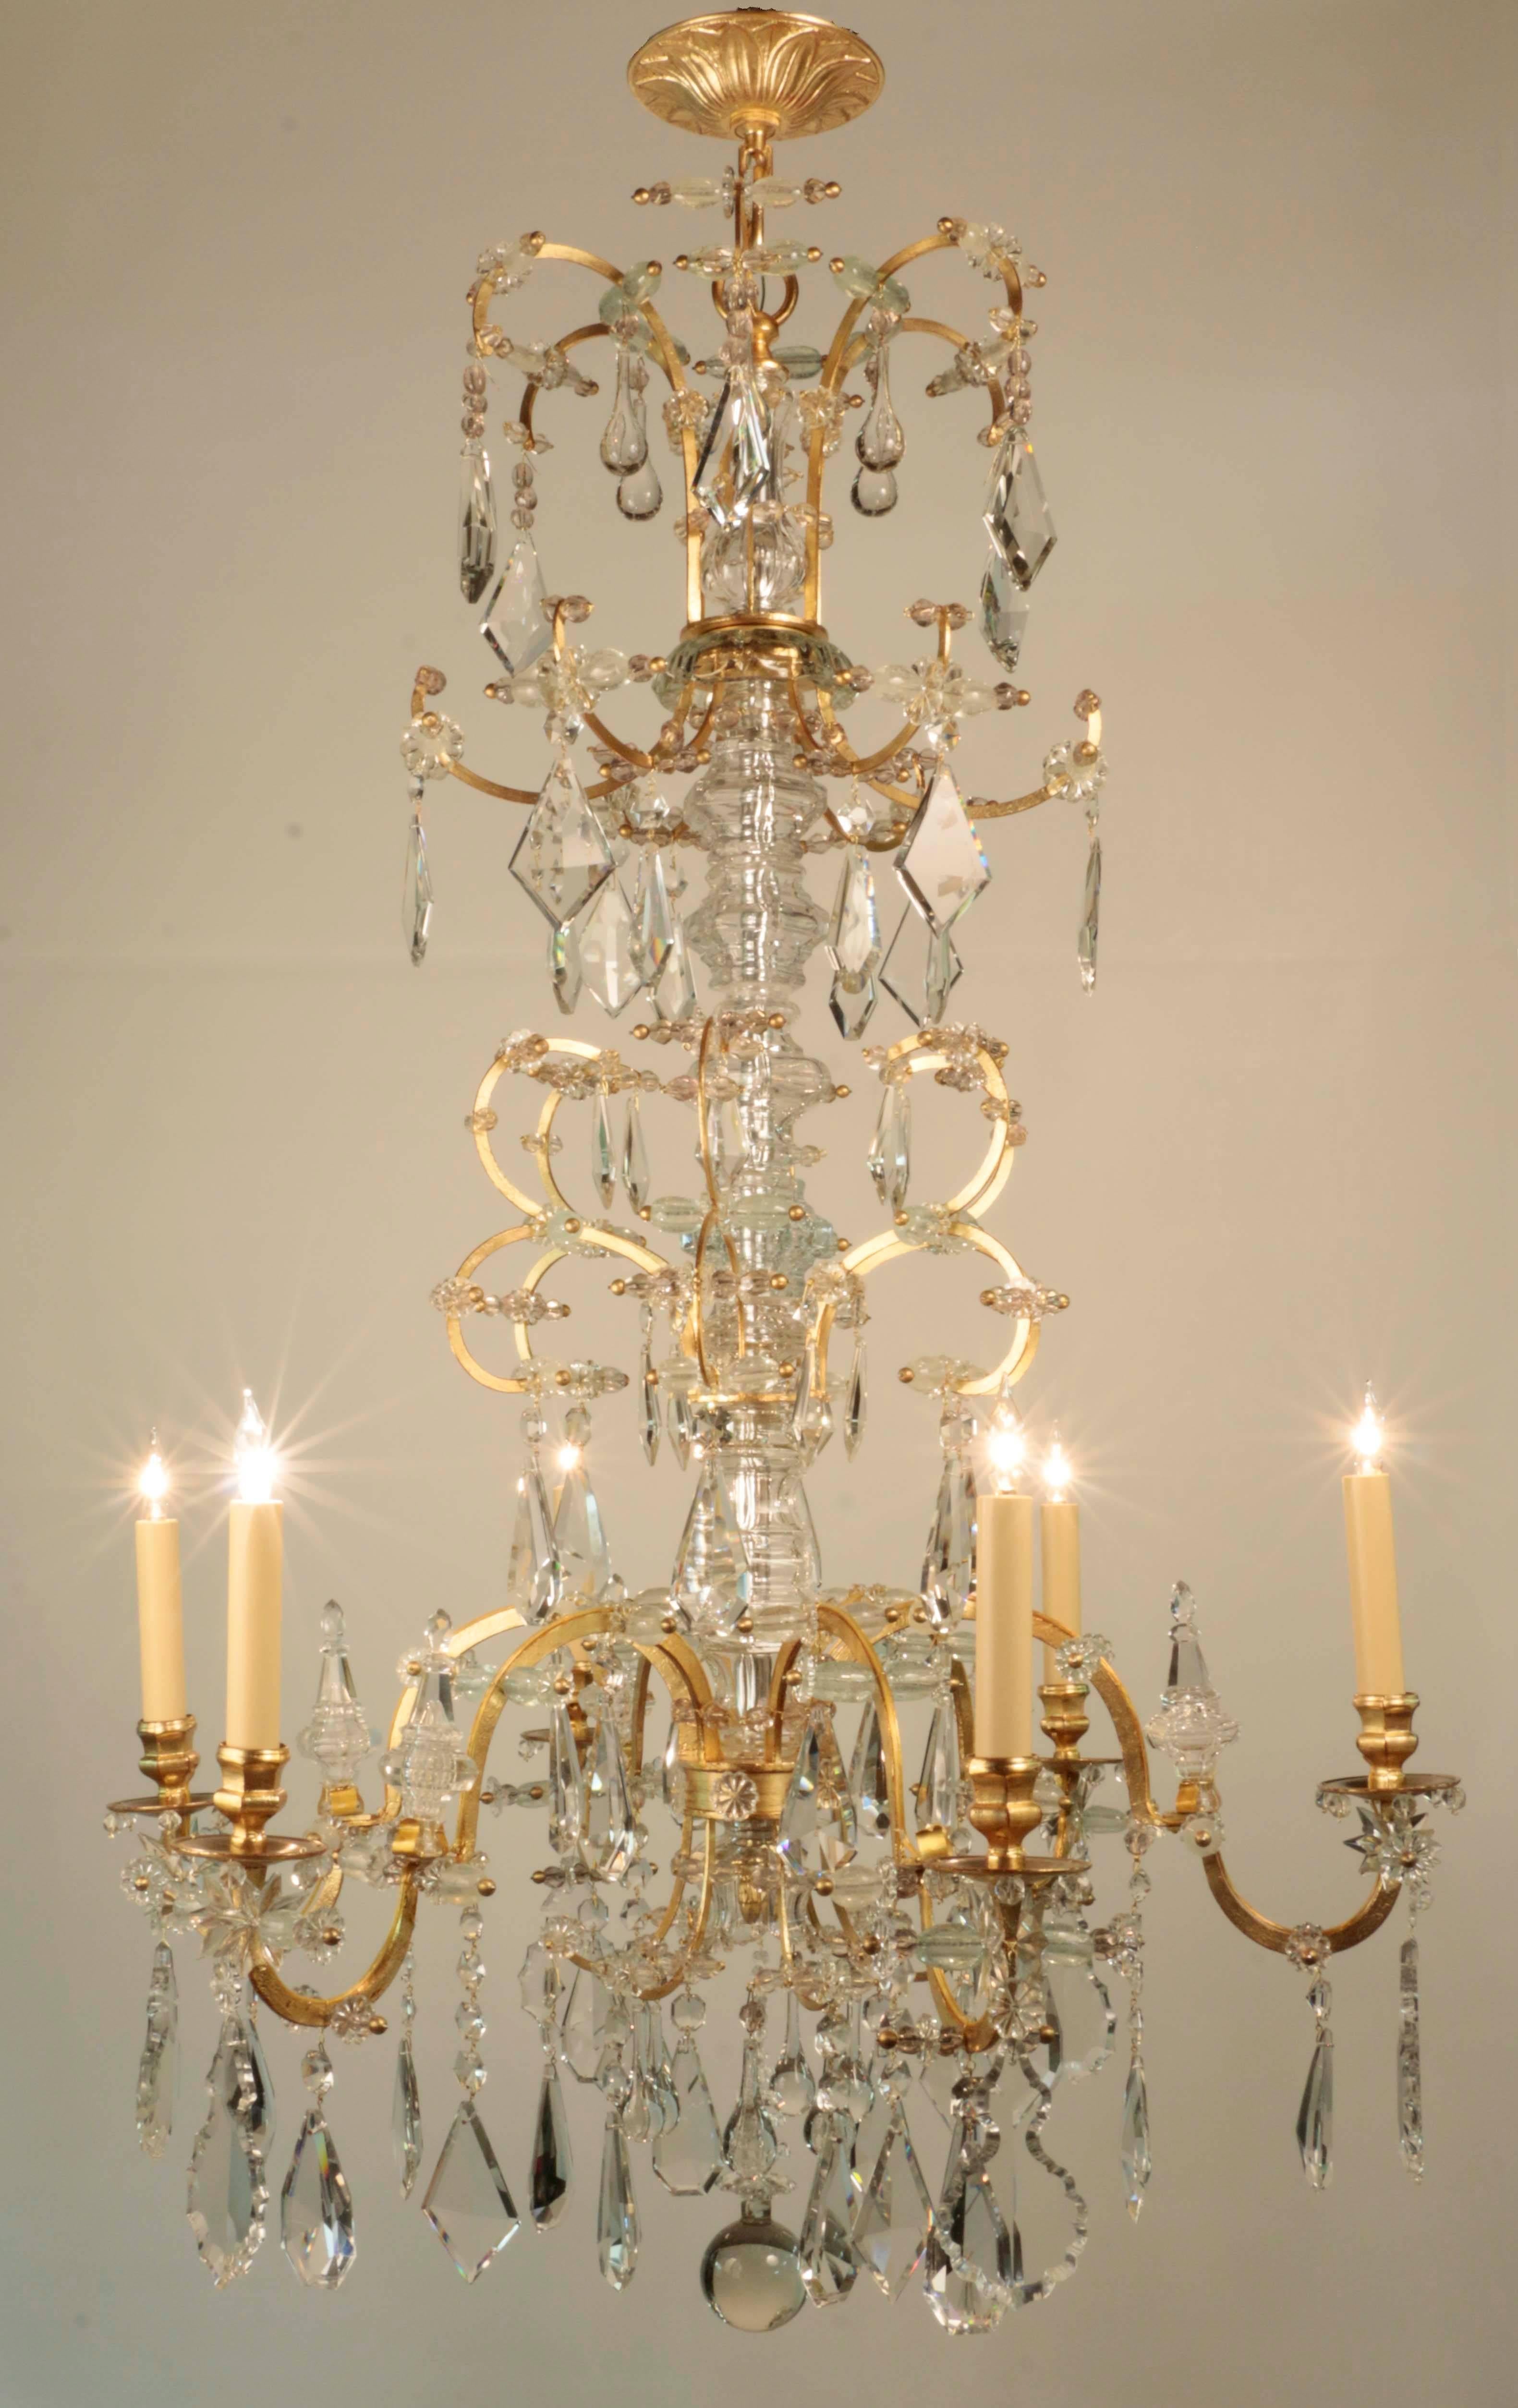 A rare pair of large French 19th century chandeliers. Each with six lights, the gilded shaped arms applied with opalescent beads, the central columns clad in shaped glass sleeves, the whole hung with drops and violin shaped crystals, with gilt